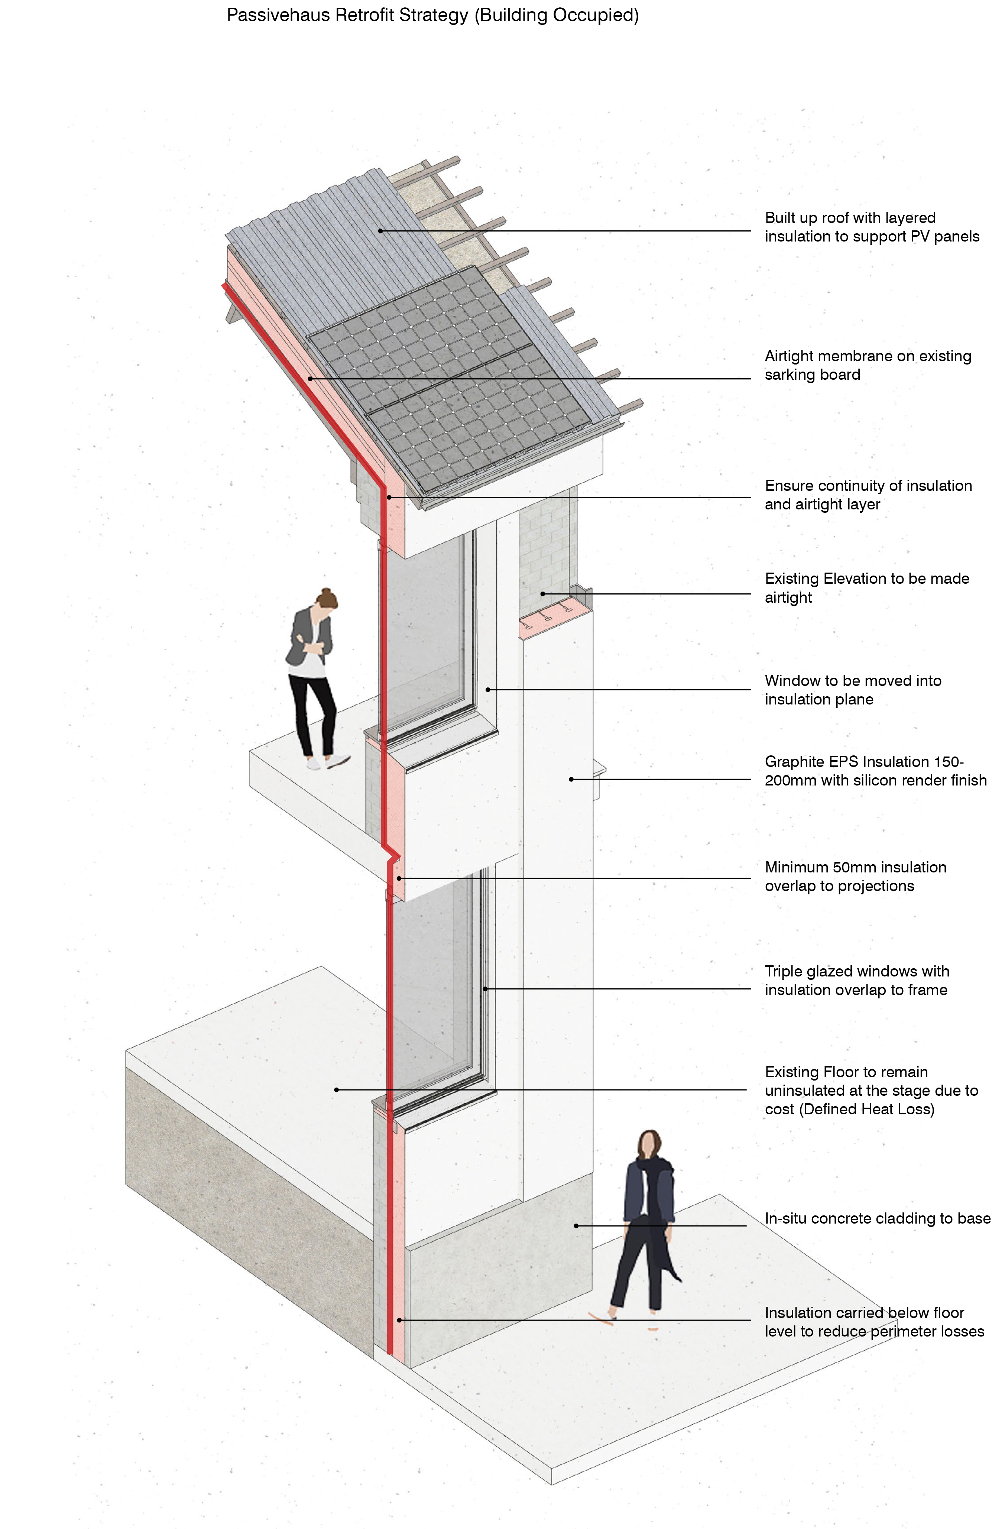 Architects' Showcase: Scotland’s first passive warehouse is a micro power station for energy, ideas and enterprise